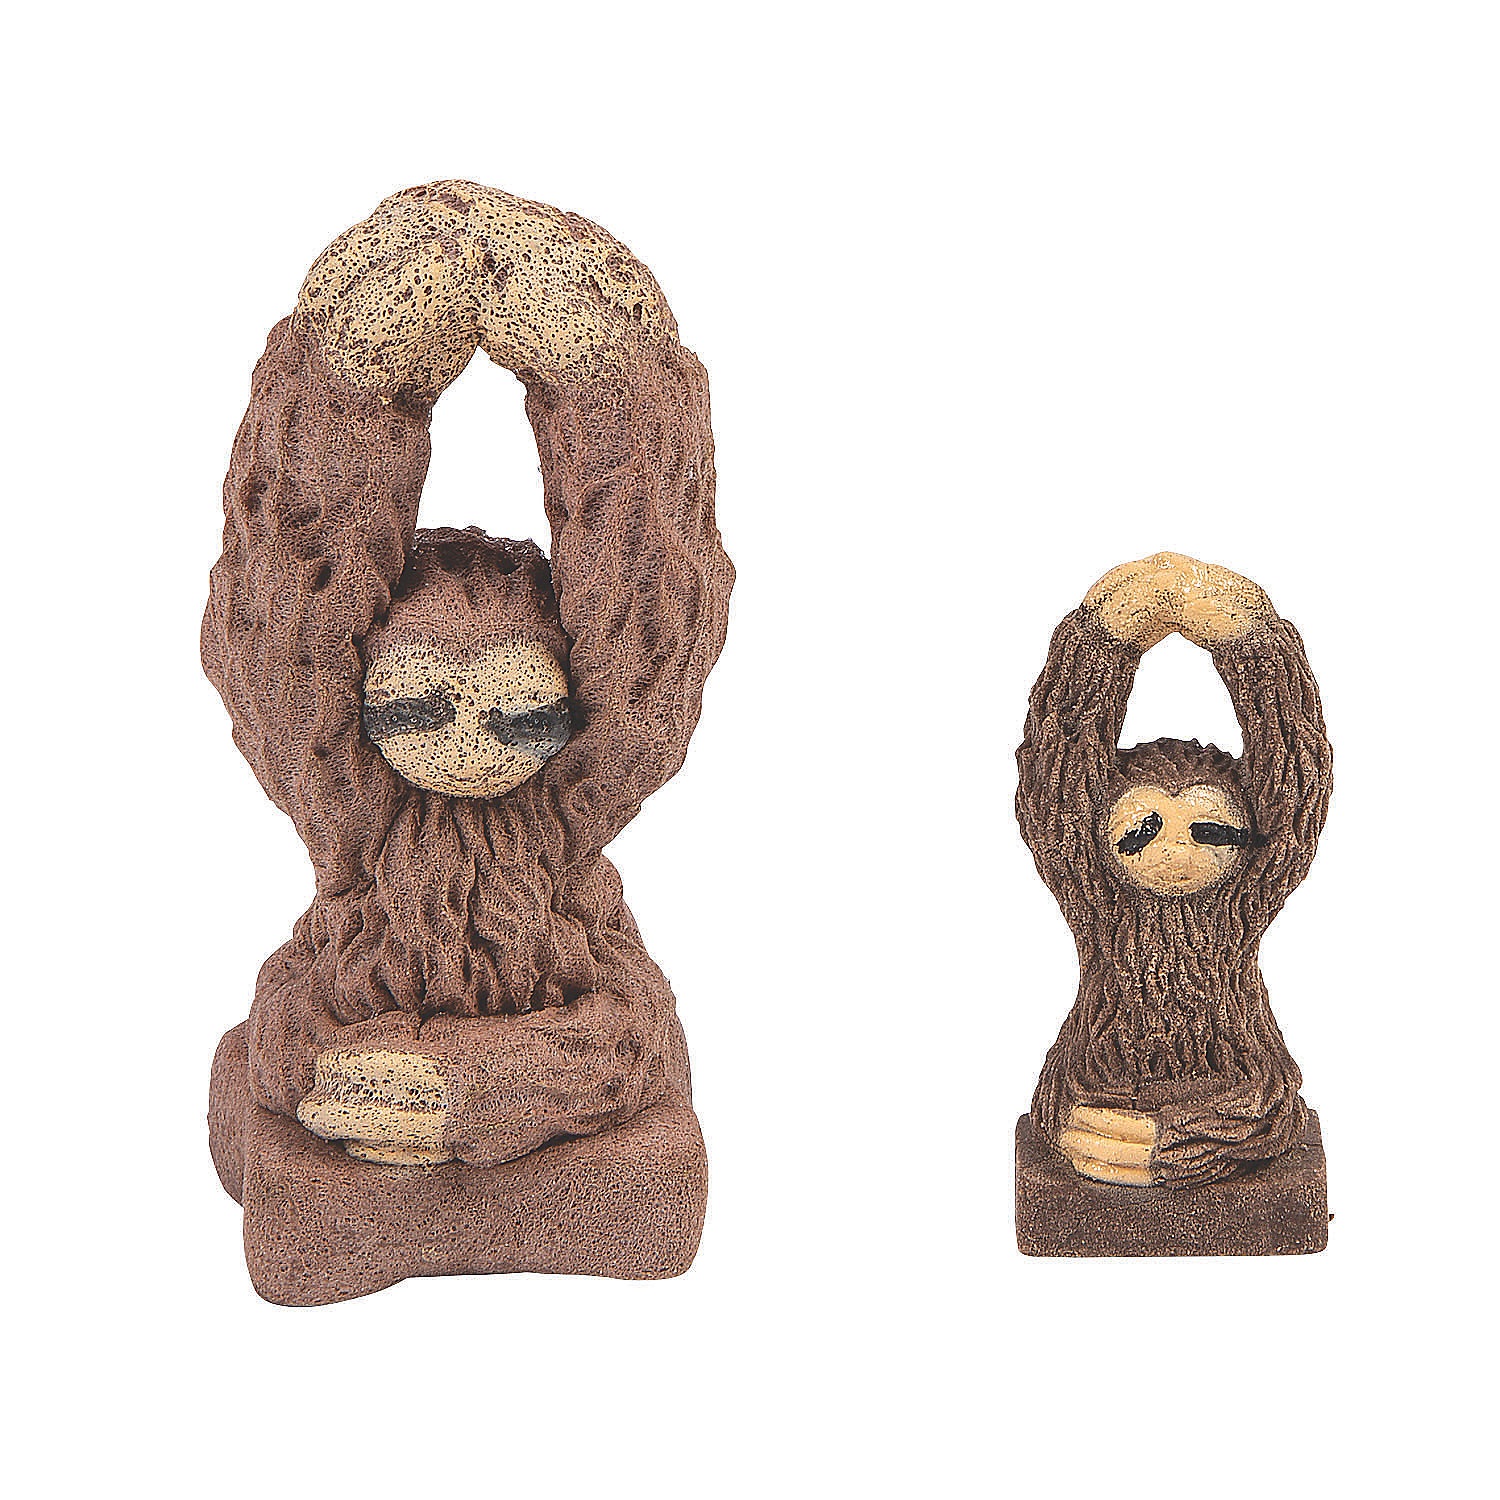 watch-it-grow-sloths-water-toy-12-pc-_13912279-a01